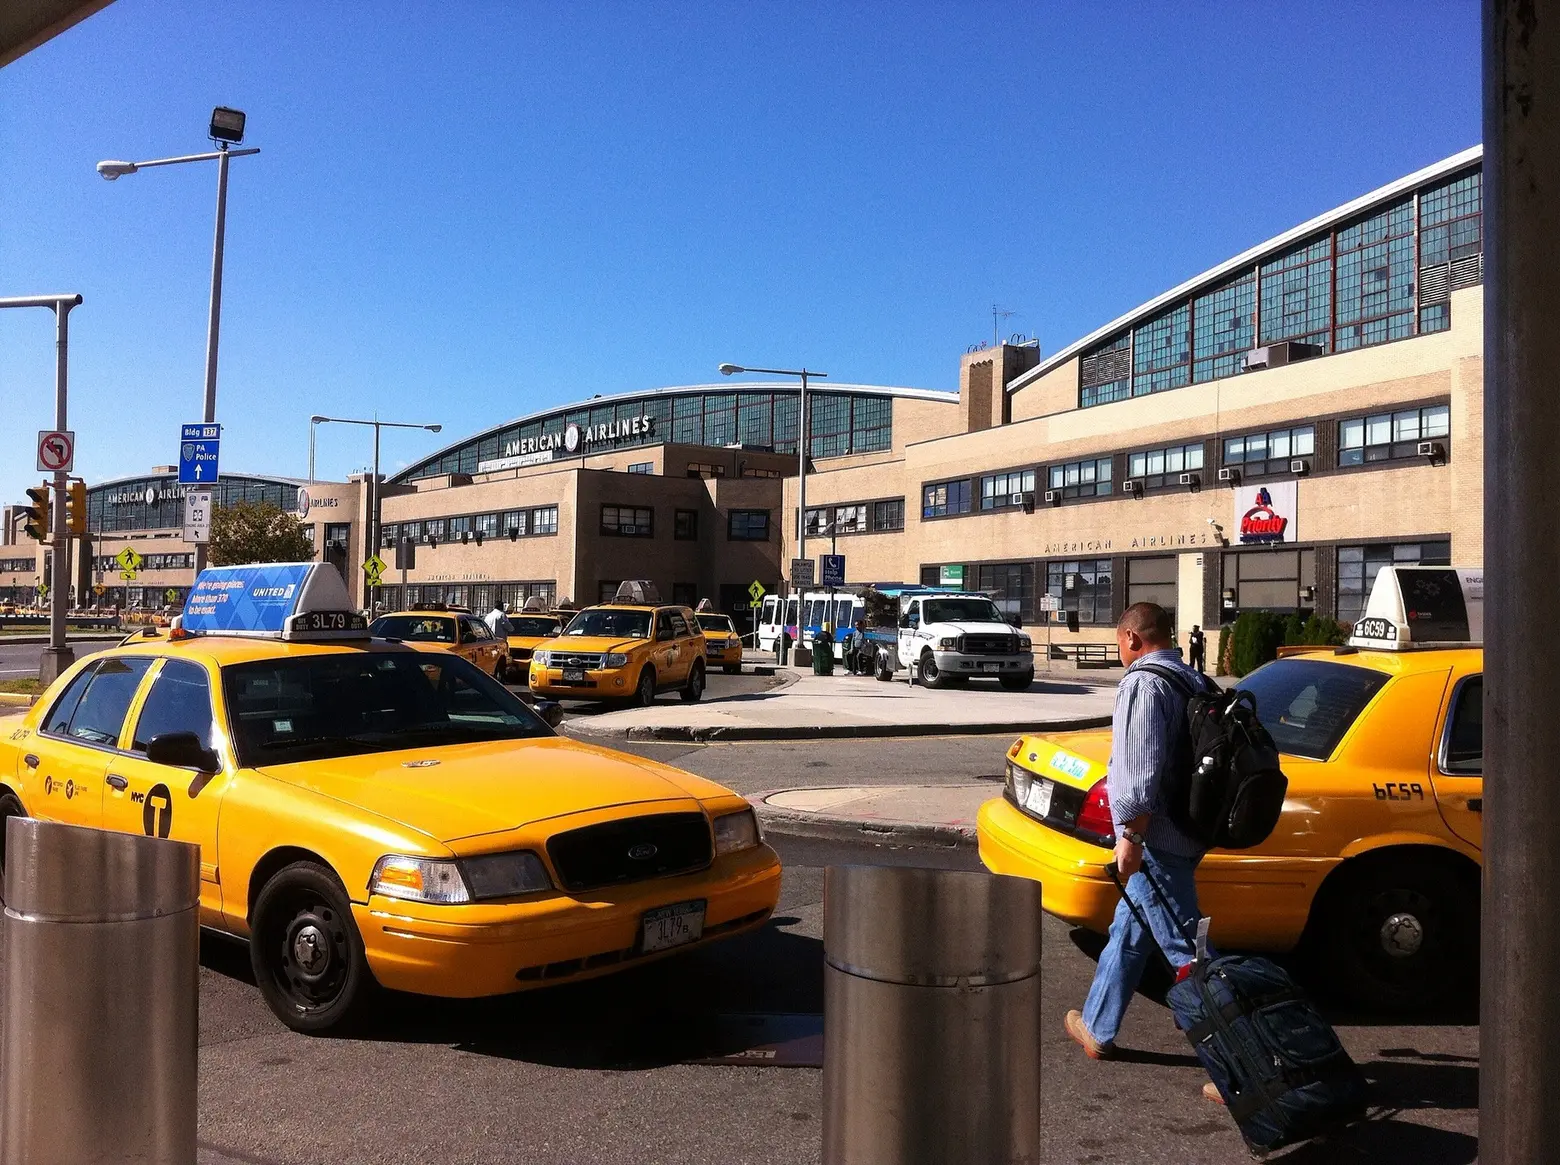 Port Authority may add $4 curbside taxi fee at airports